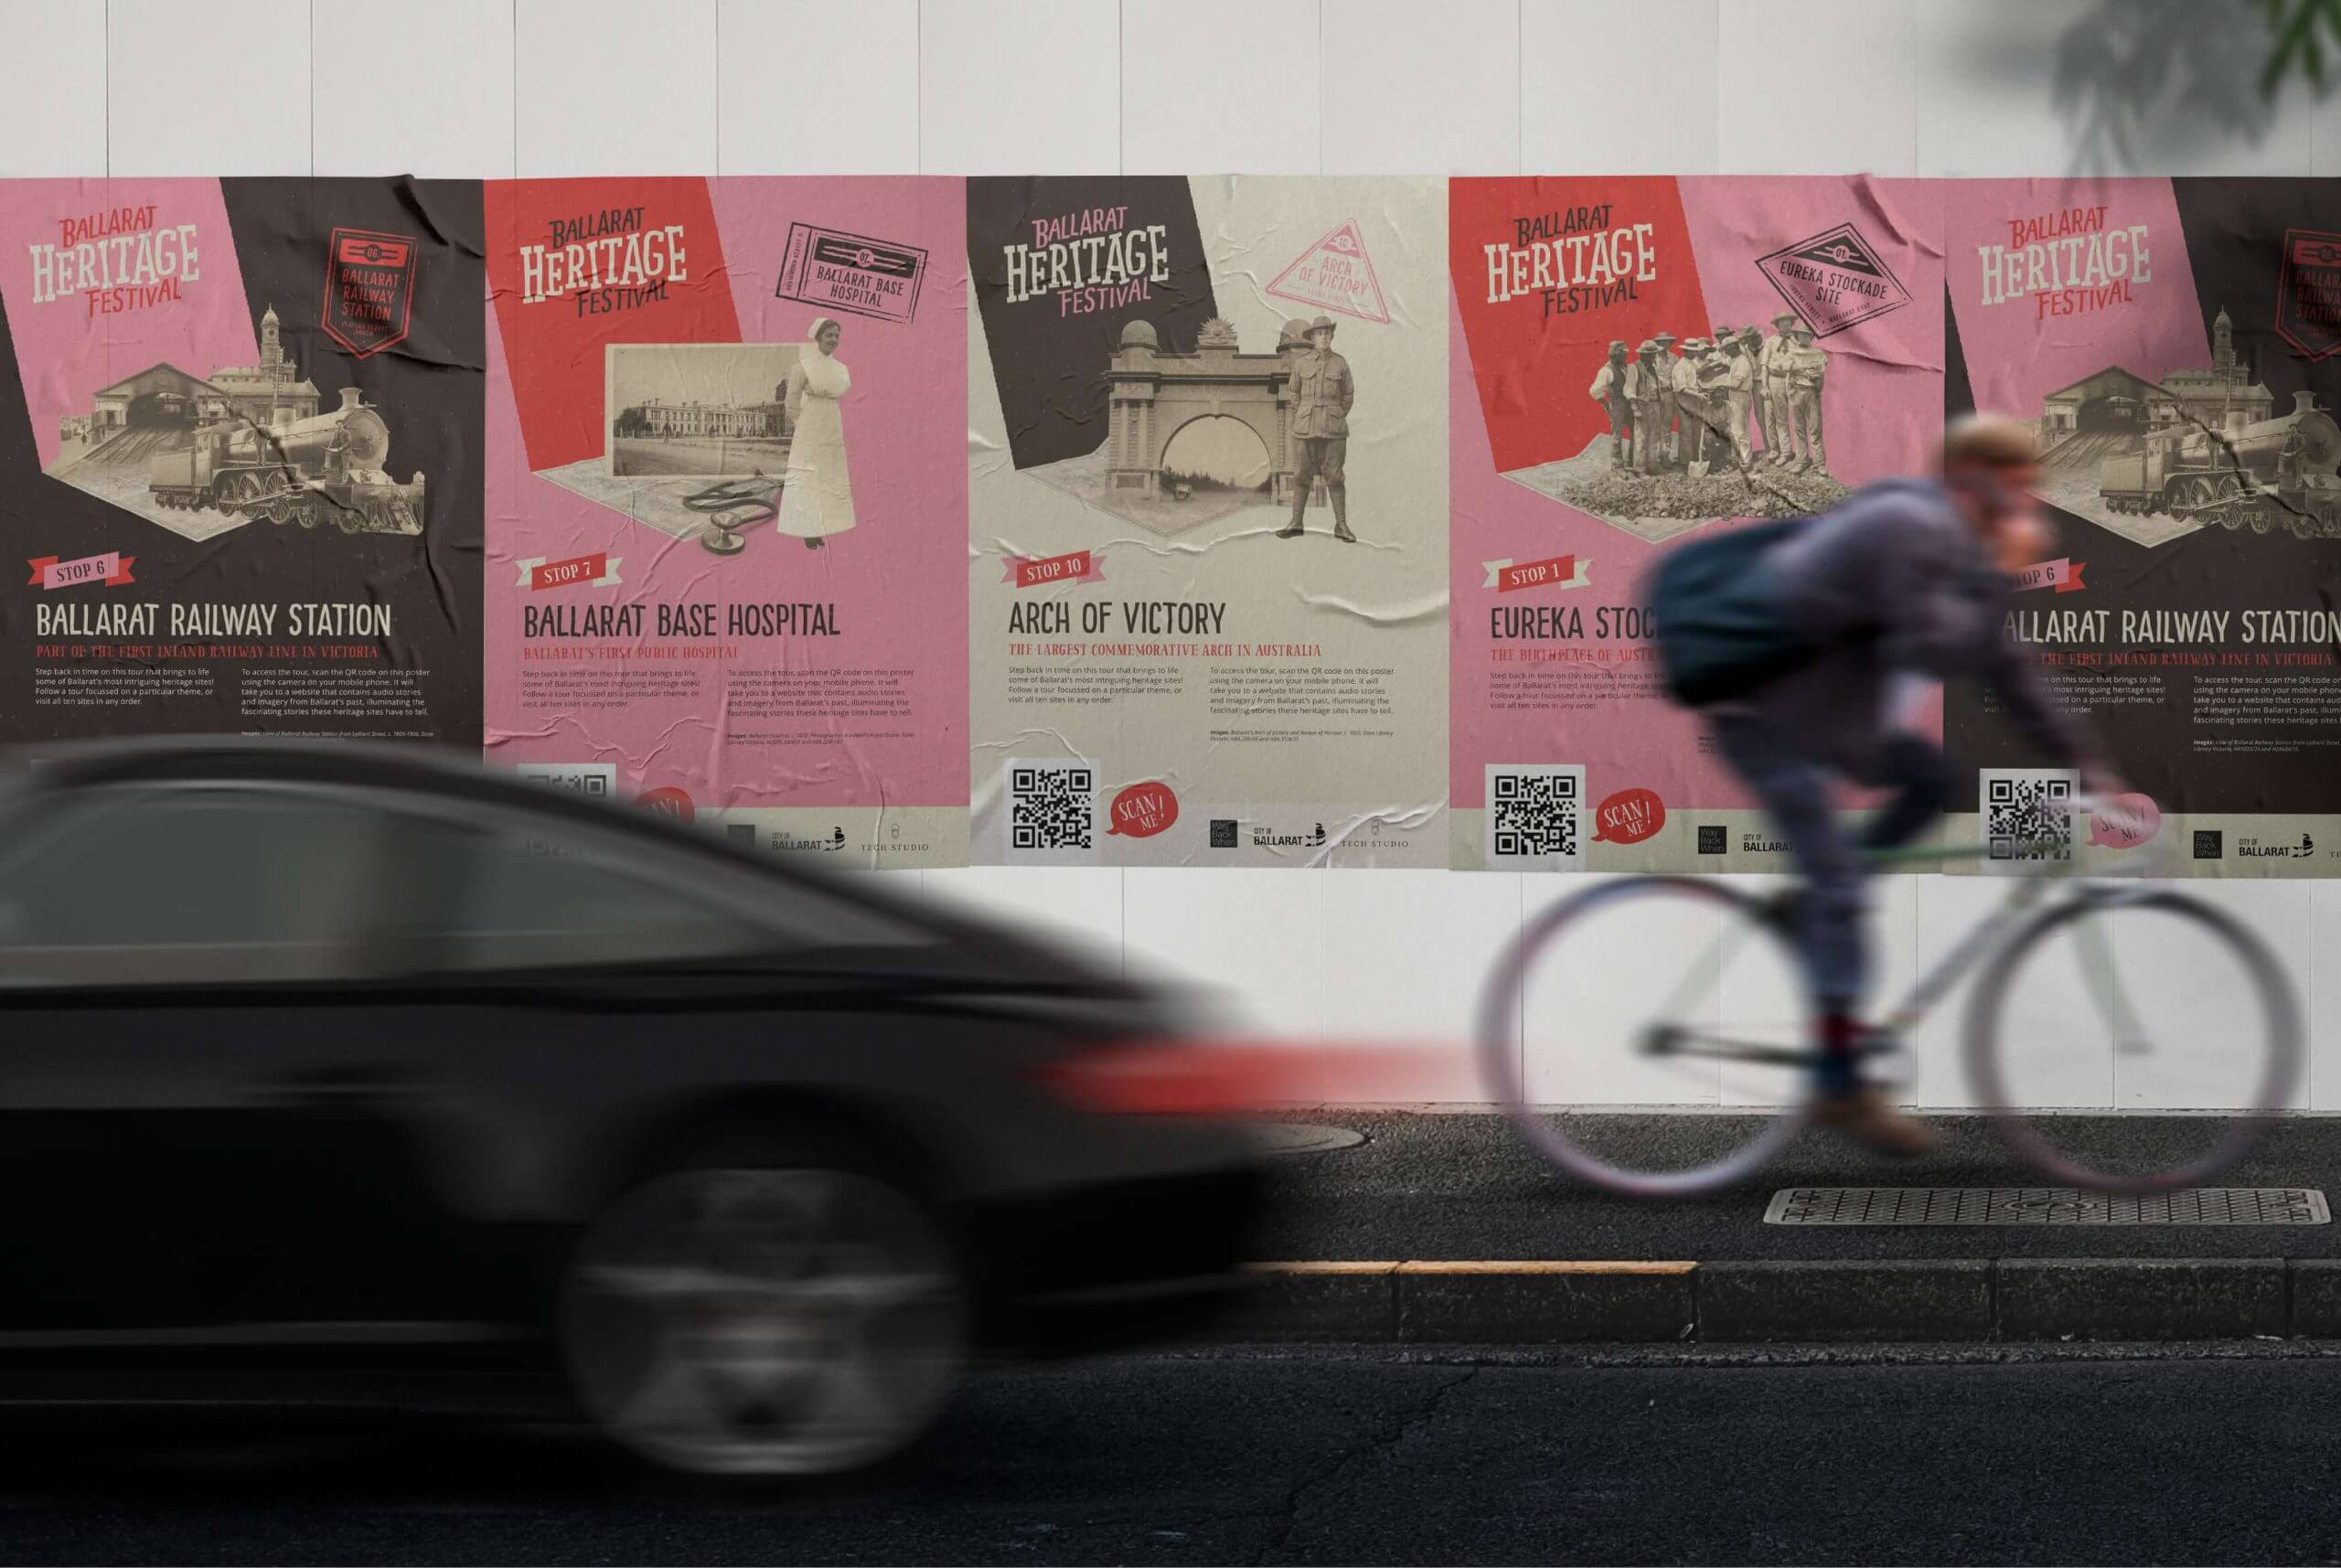 Ballarat Heritage Festival AR experience posters shown across a wall as a mockup